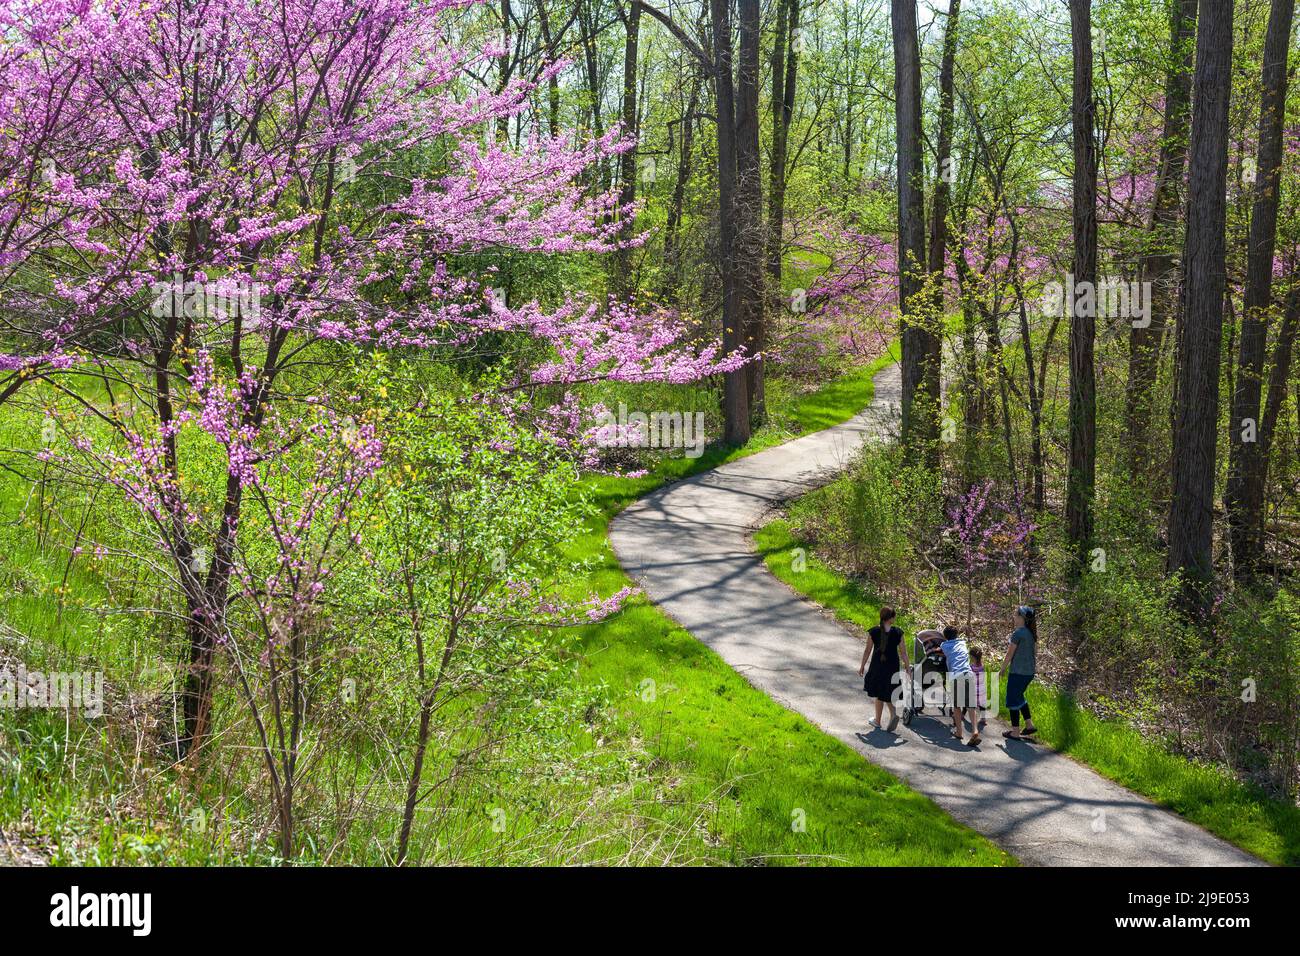 New Boston, Michigan - People walk on a path in Lower Huron Metropark, where Eastern Redbud (Cercis canadensis) trees are blooming. Stock Photo